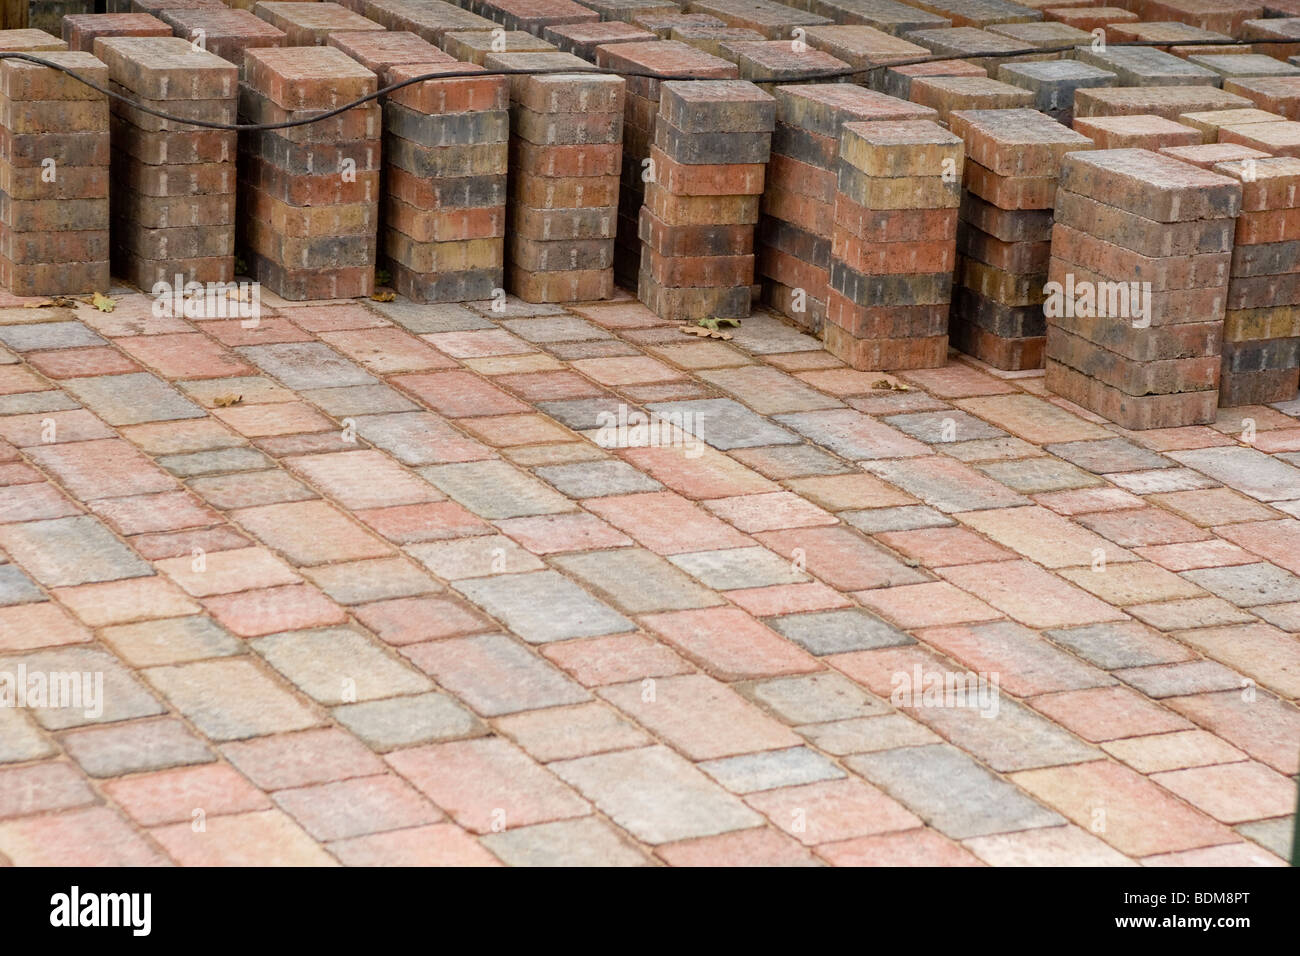 A pile of paving brick on a driveway. Stock Photo